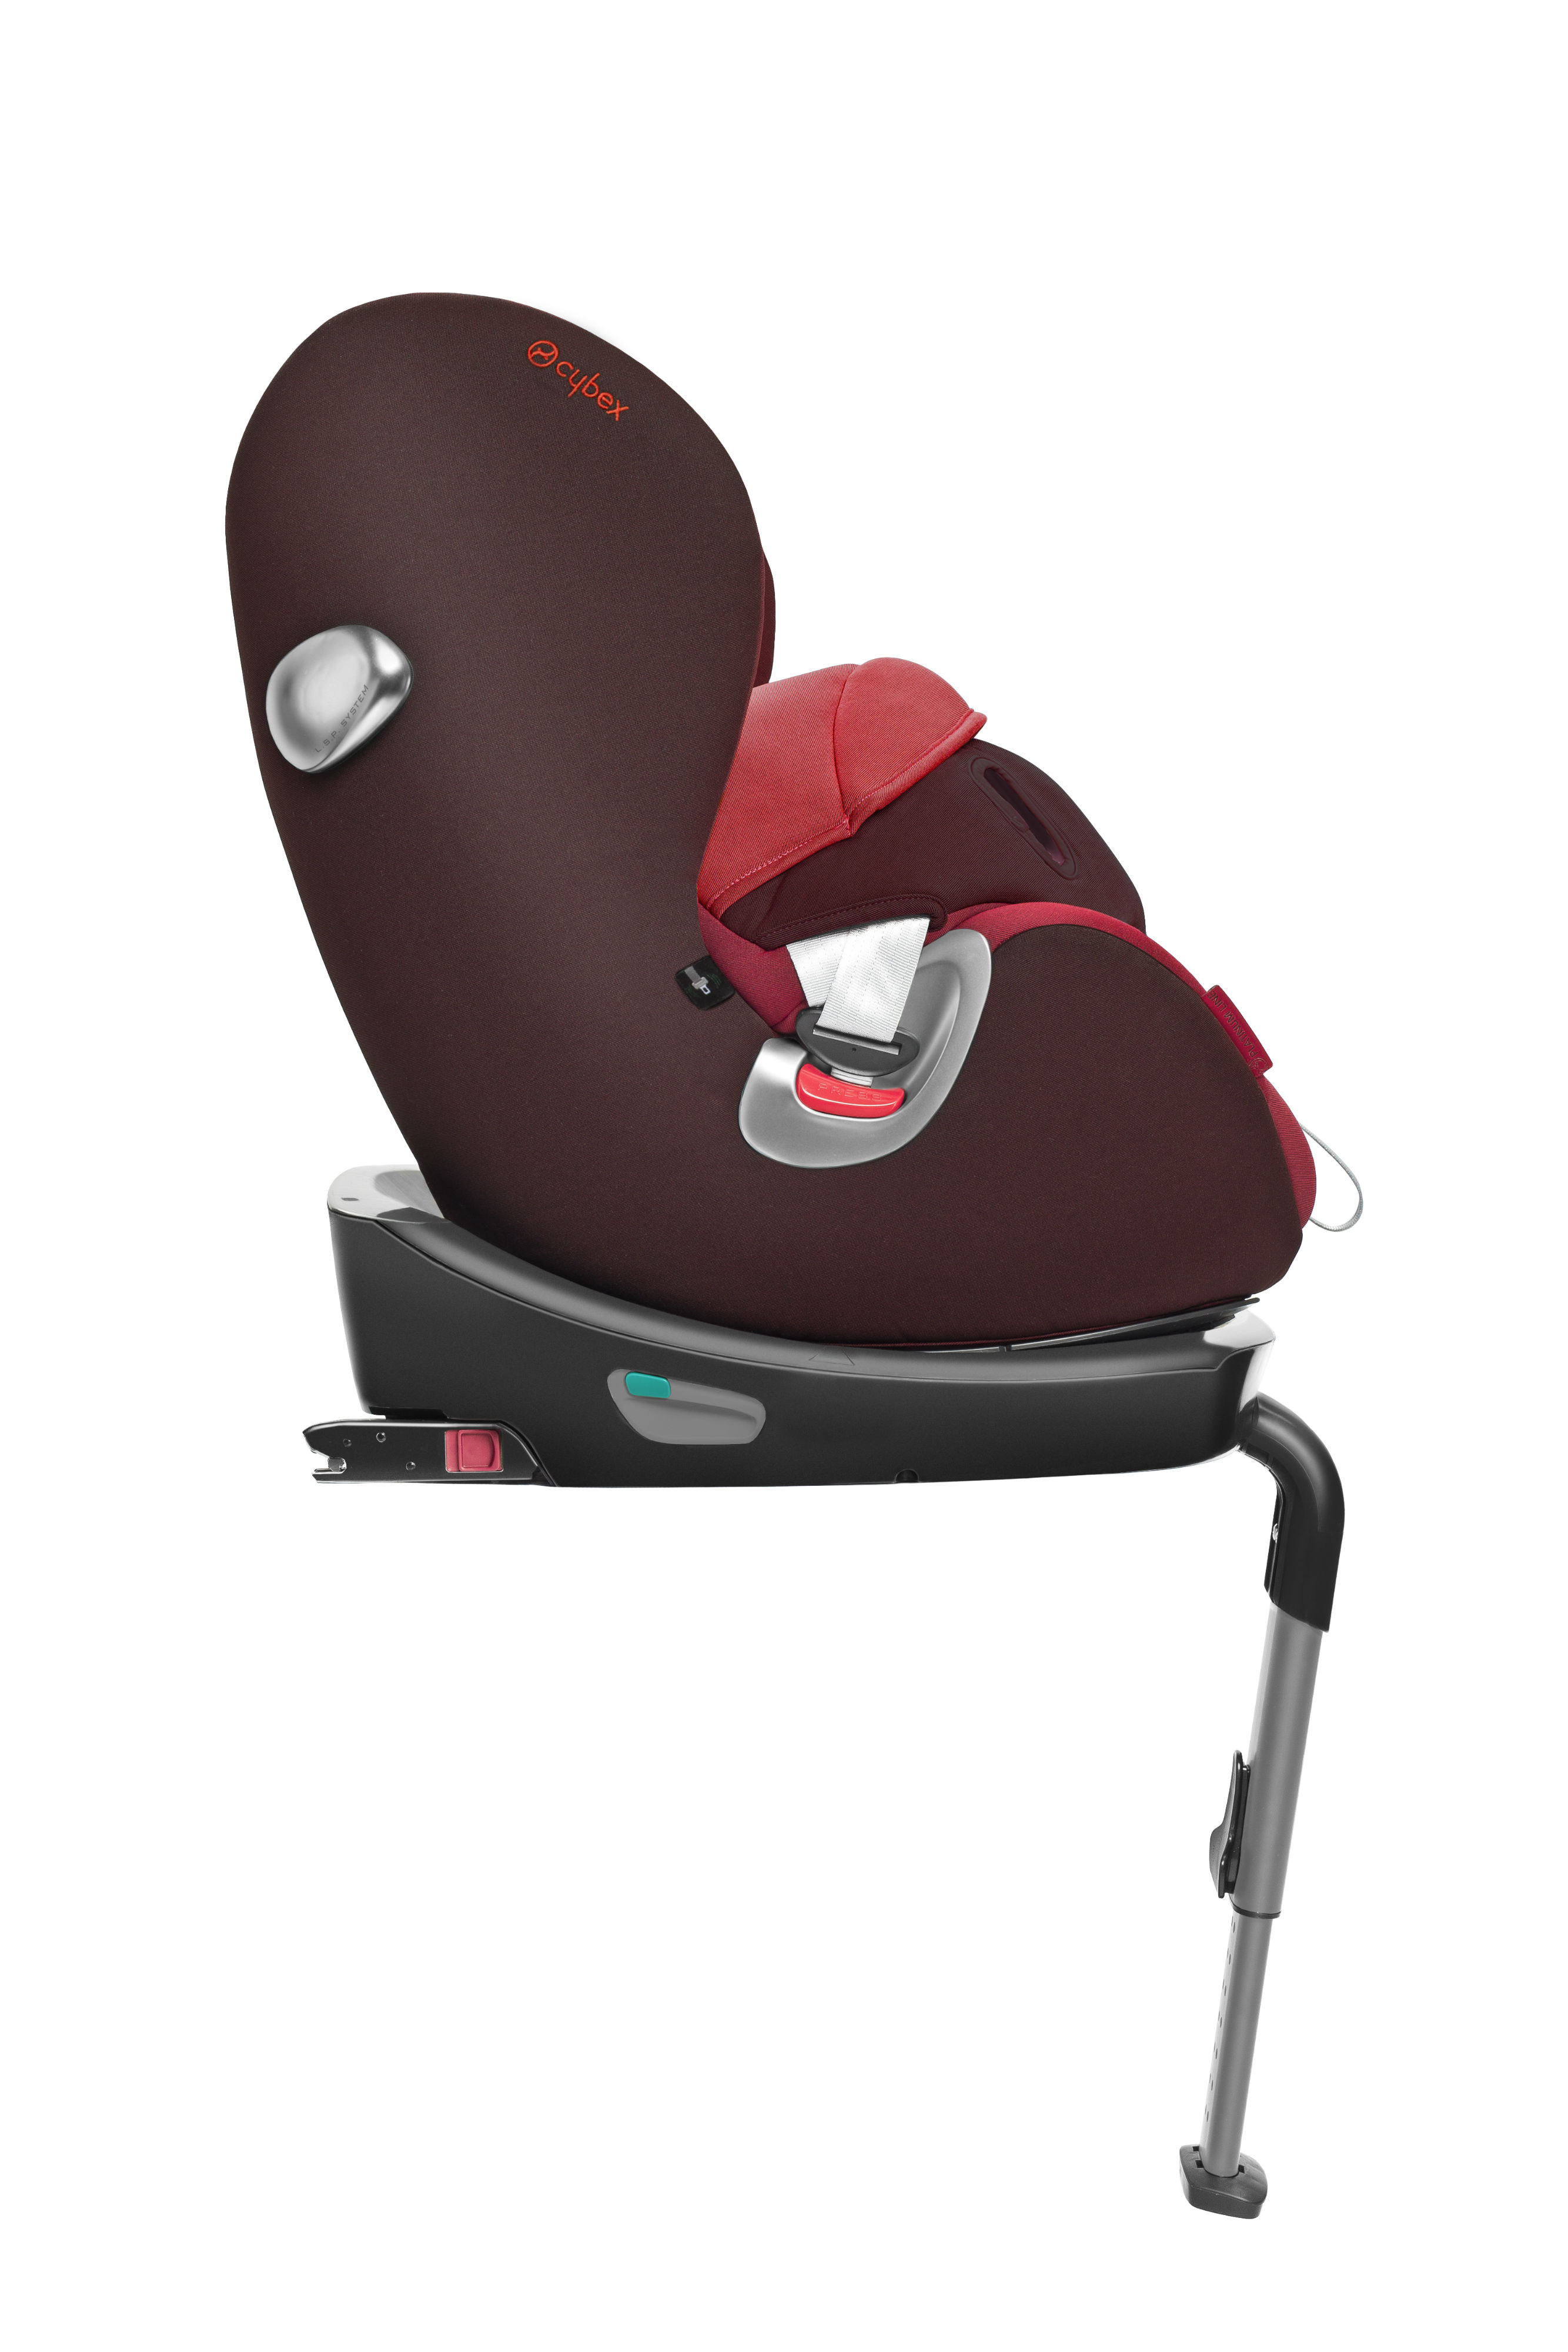 Cybex Sirona Group 1 car child seat review